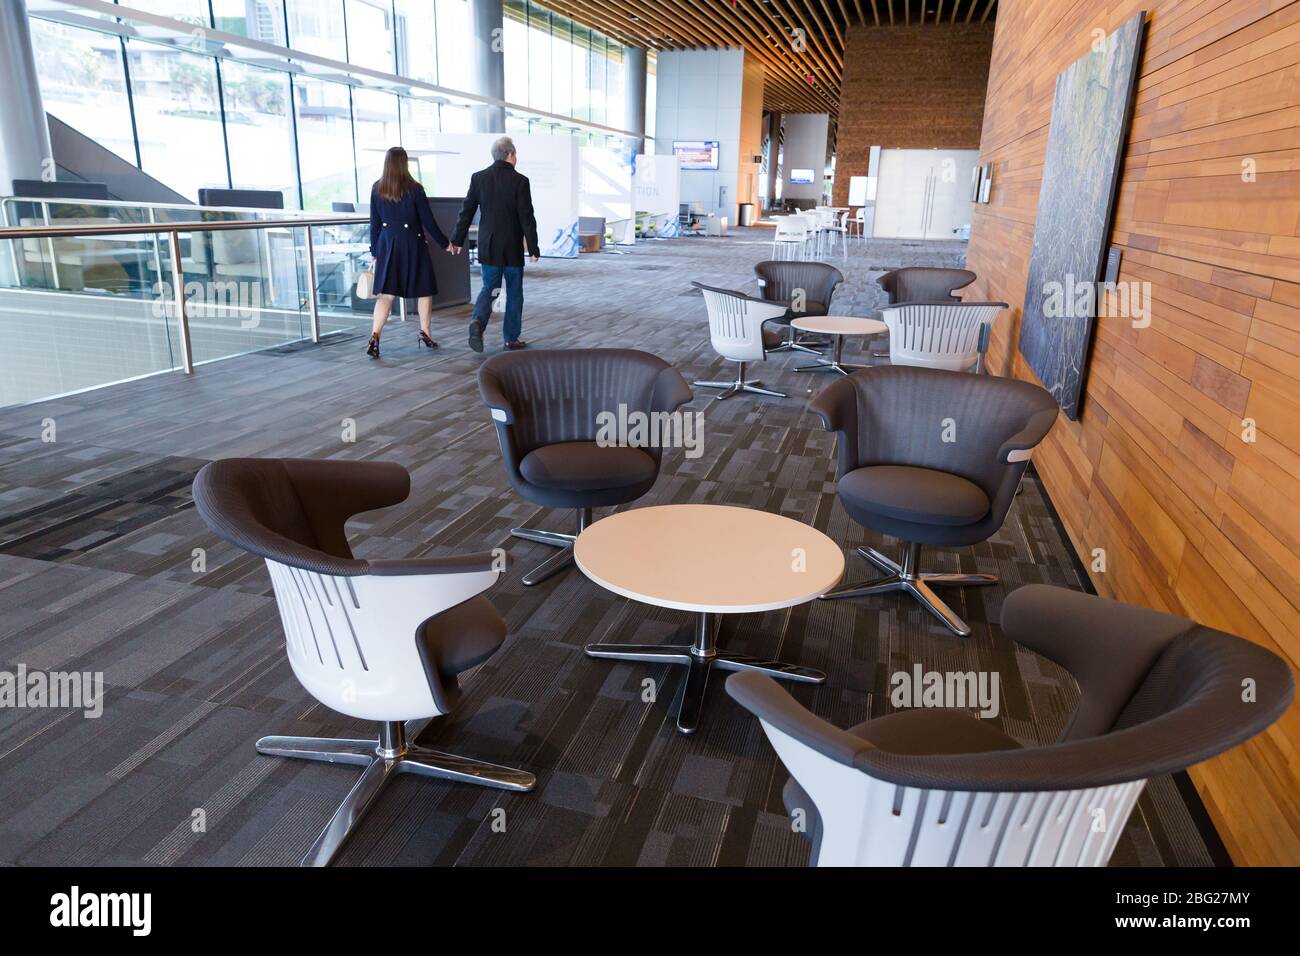 VANCOUVER, BC, CANADA - FEB 28, 2020: The interior of the Vancouver Convention Center. Stock Photo